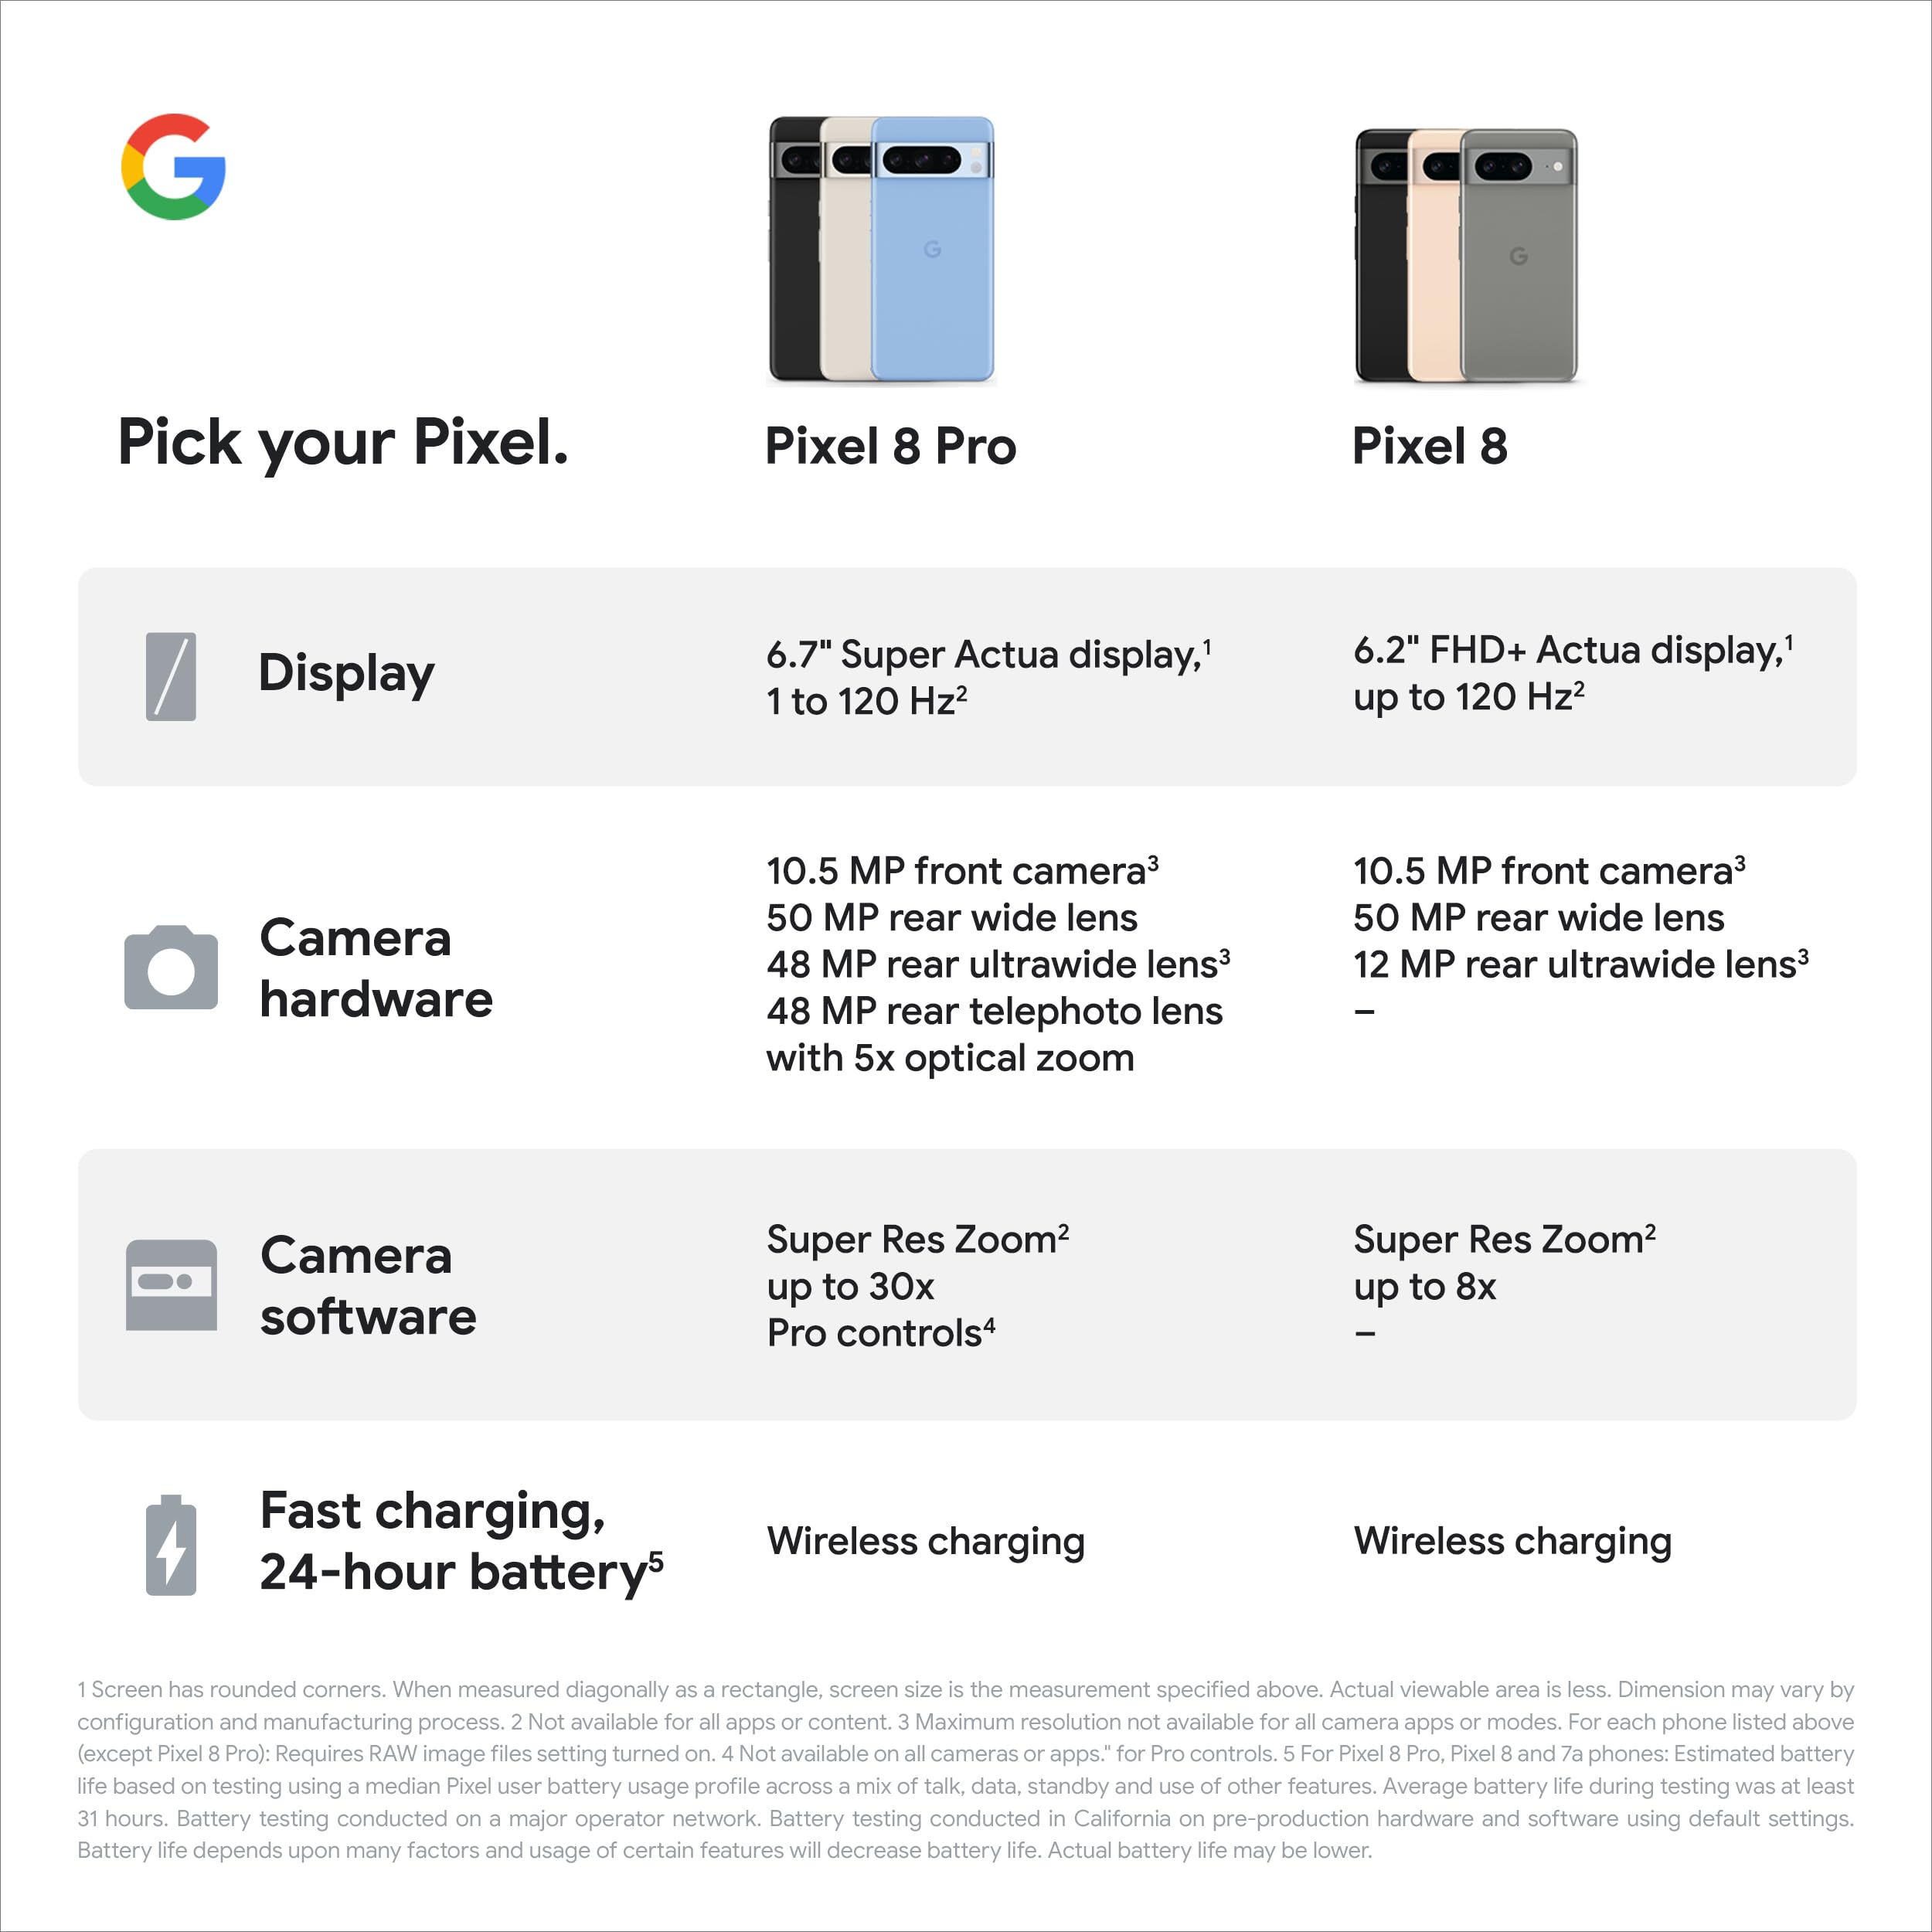 Specs showing the differences between the Pixel 8 Pro and Pixel 8